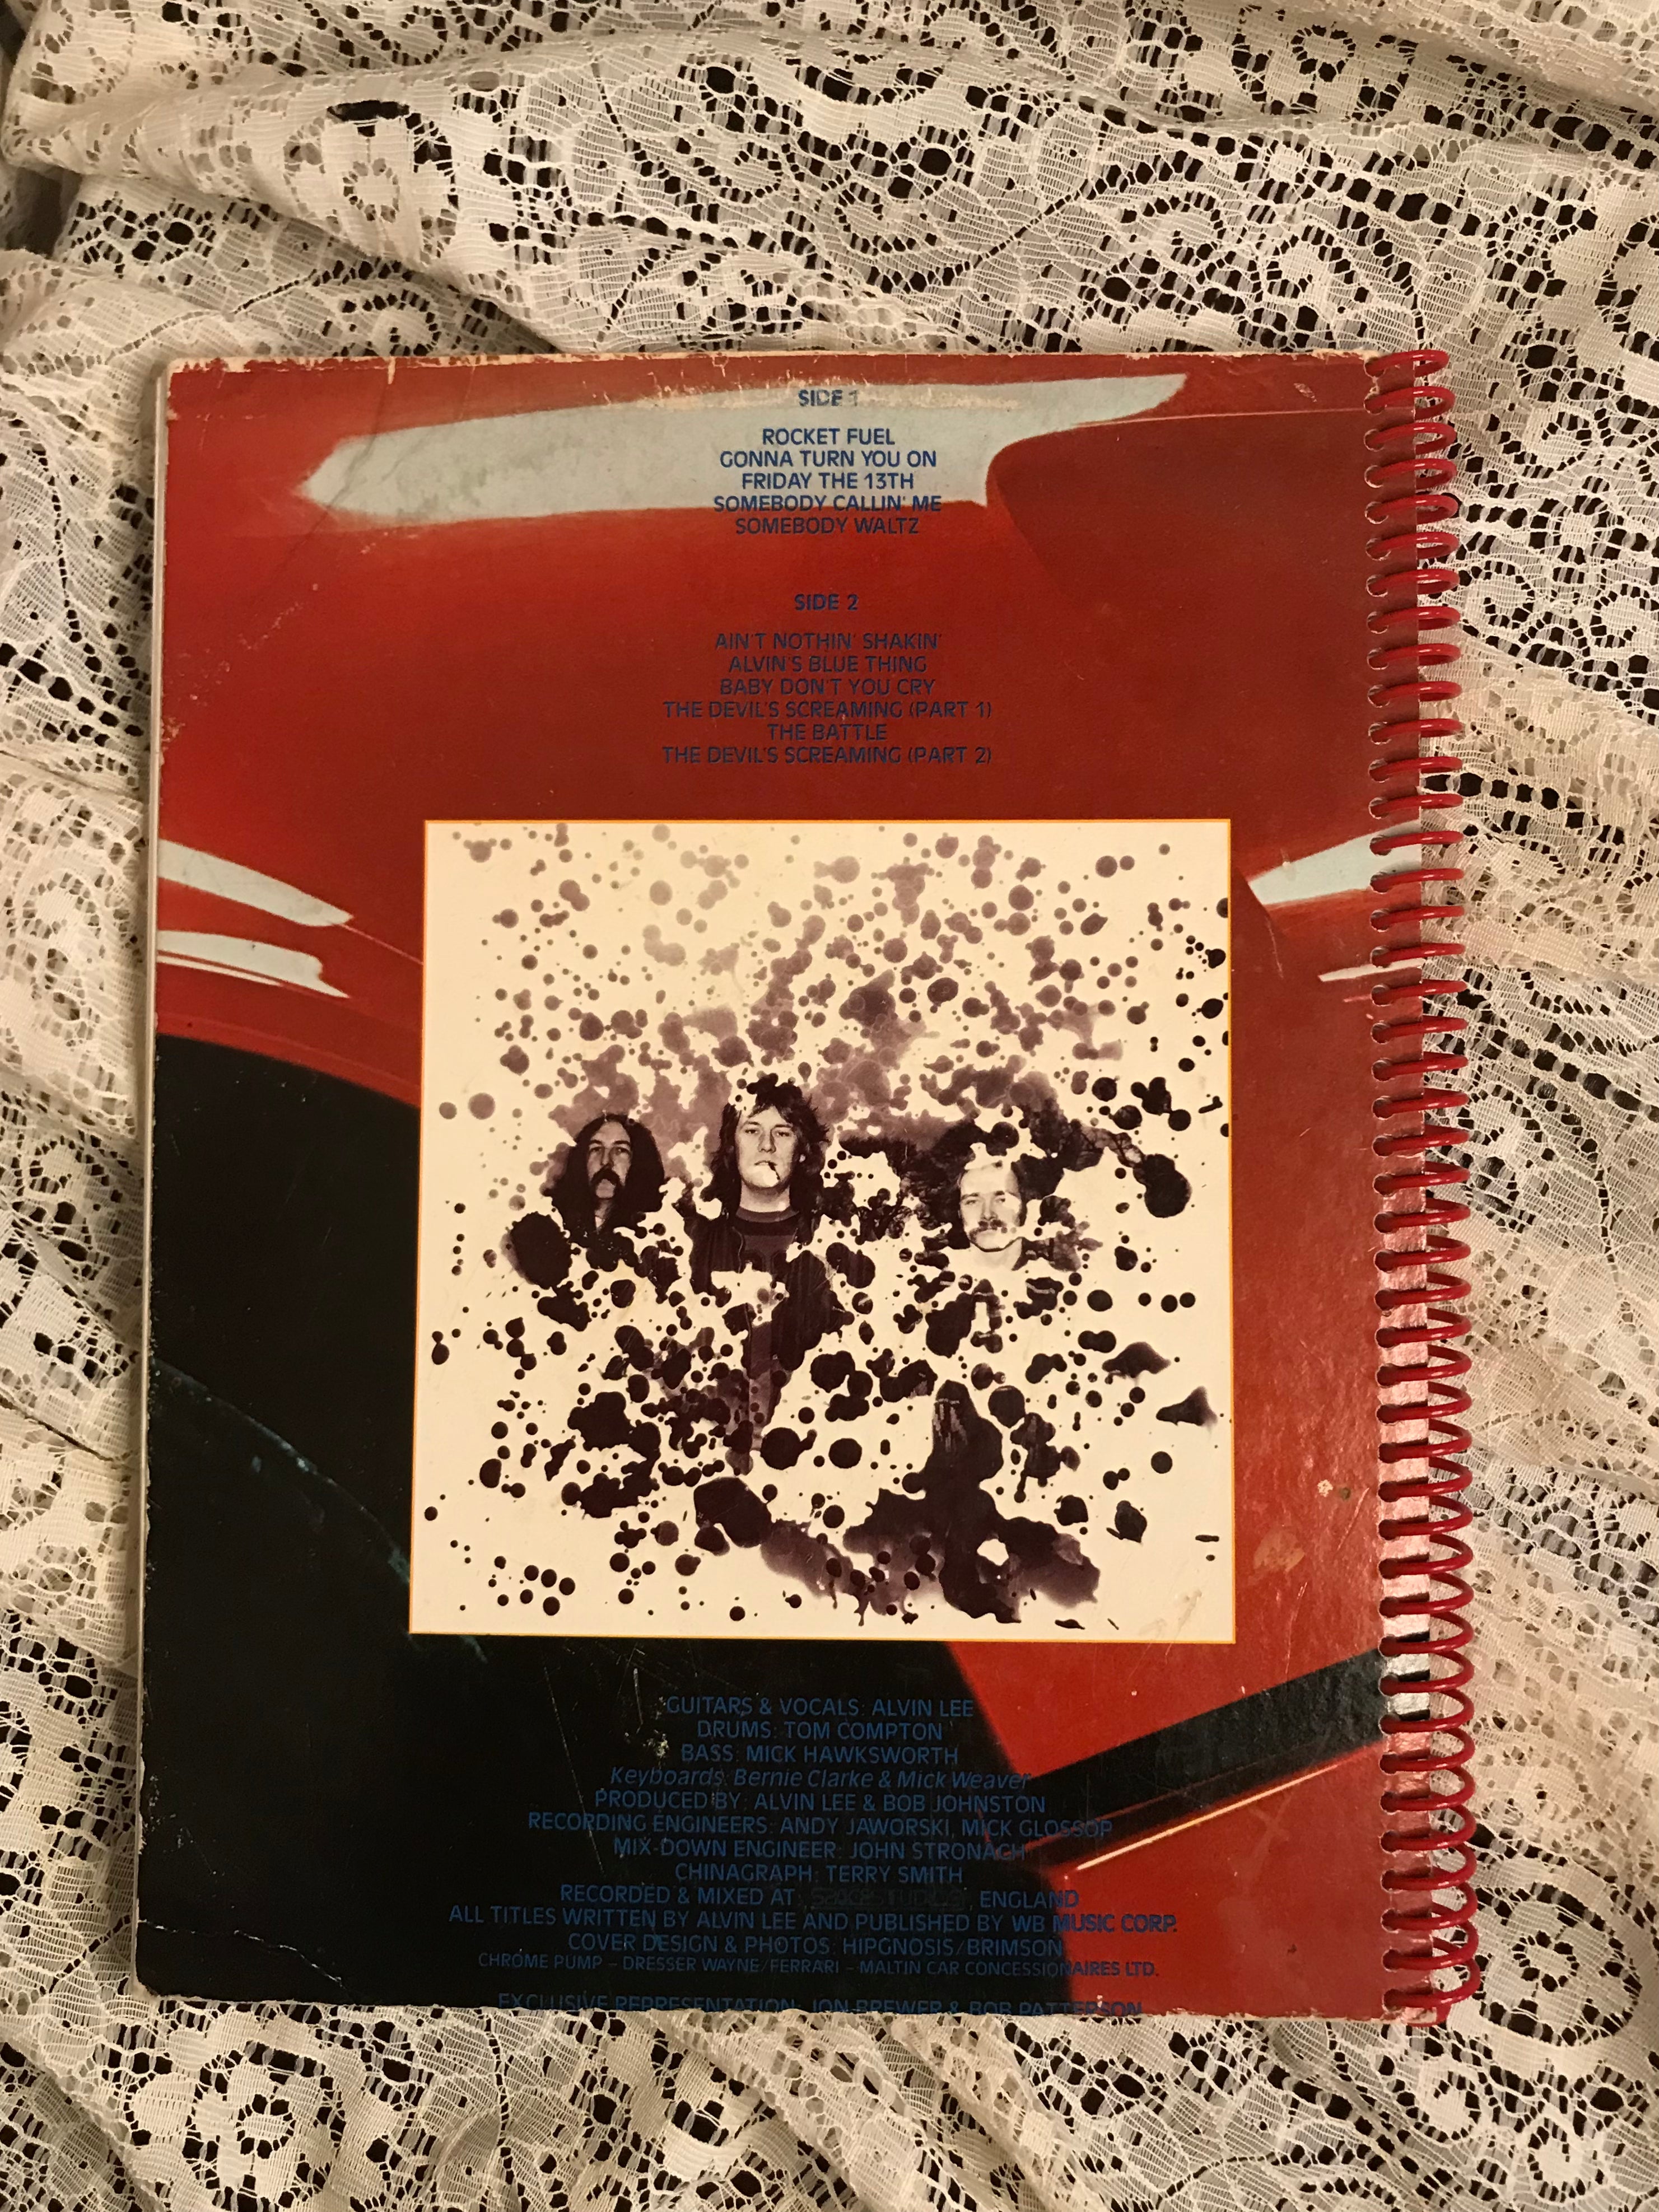 Alvin Lee and Ten Years Later Album Cover Notebook